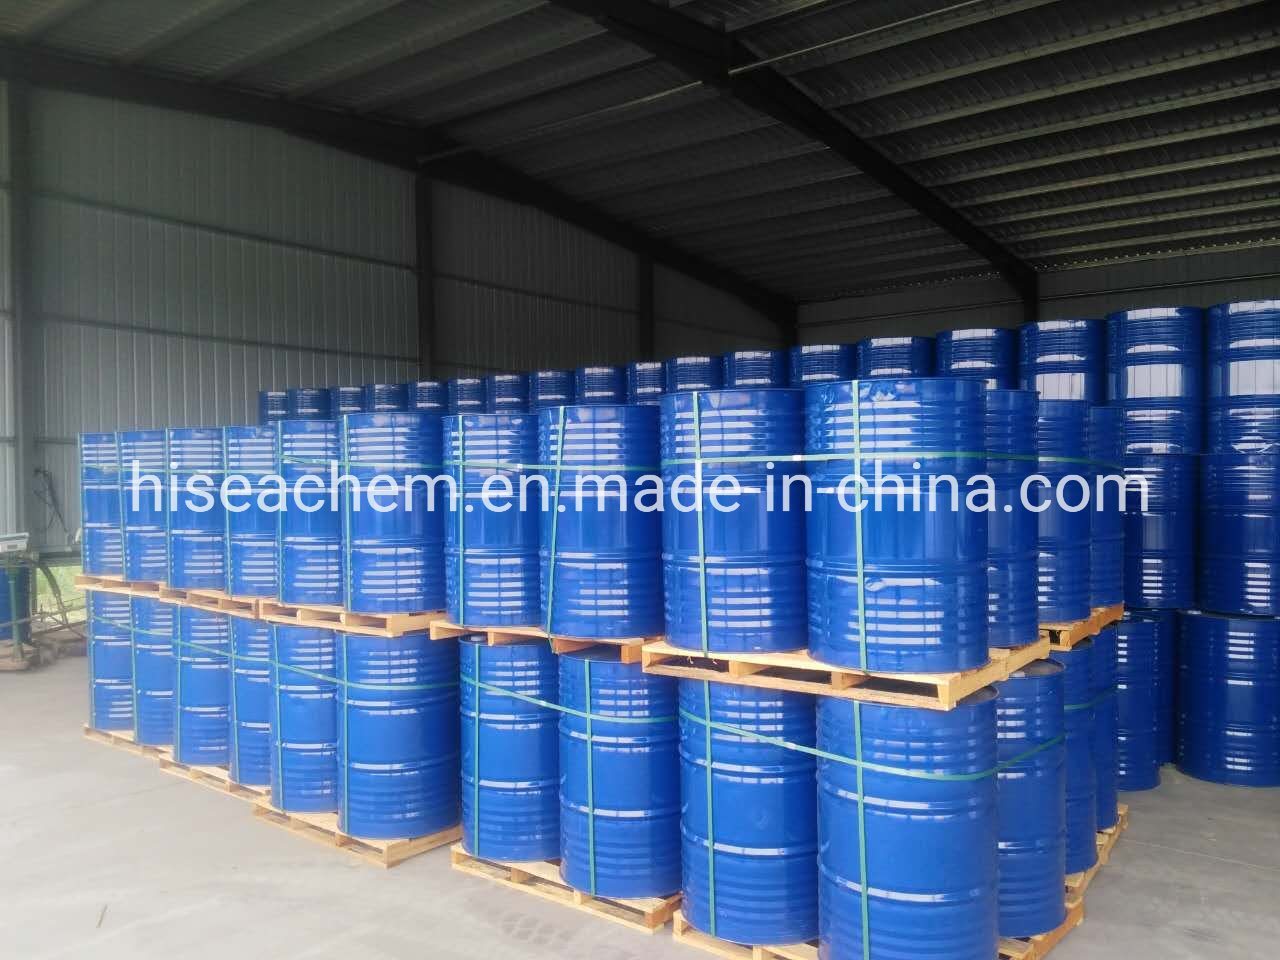 High Quality for Acetonitrile CAS 75-05-8